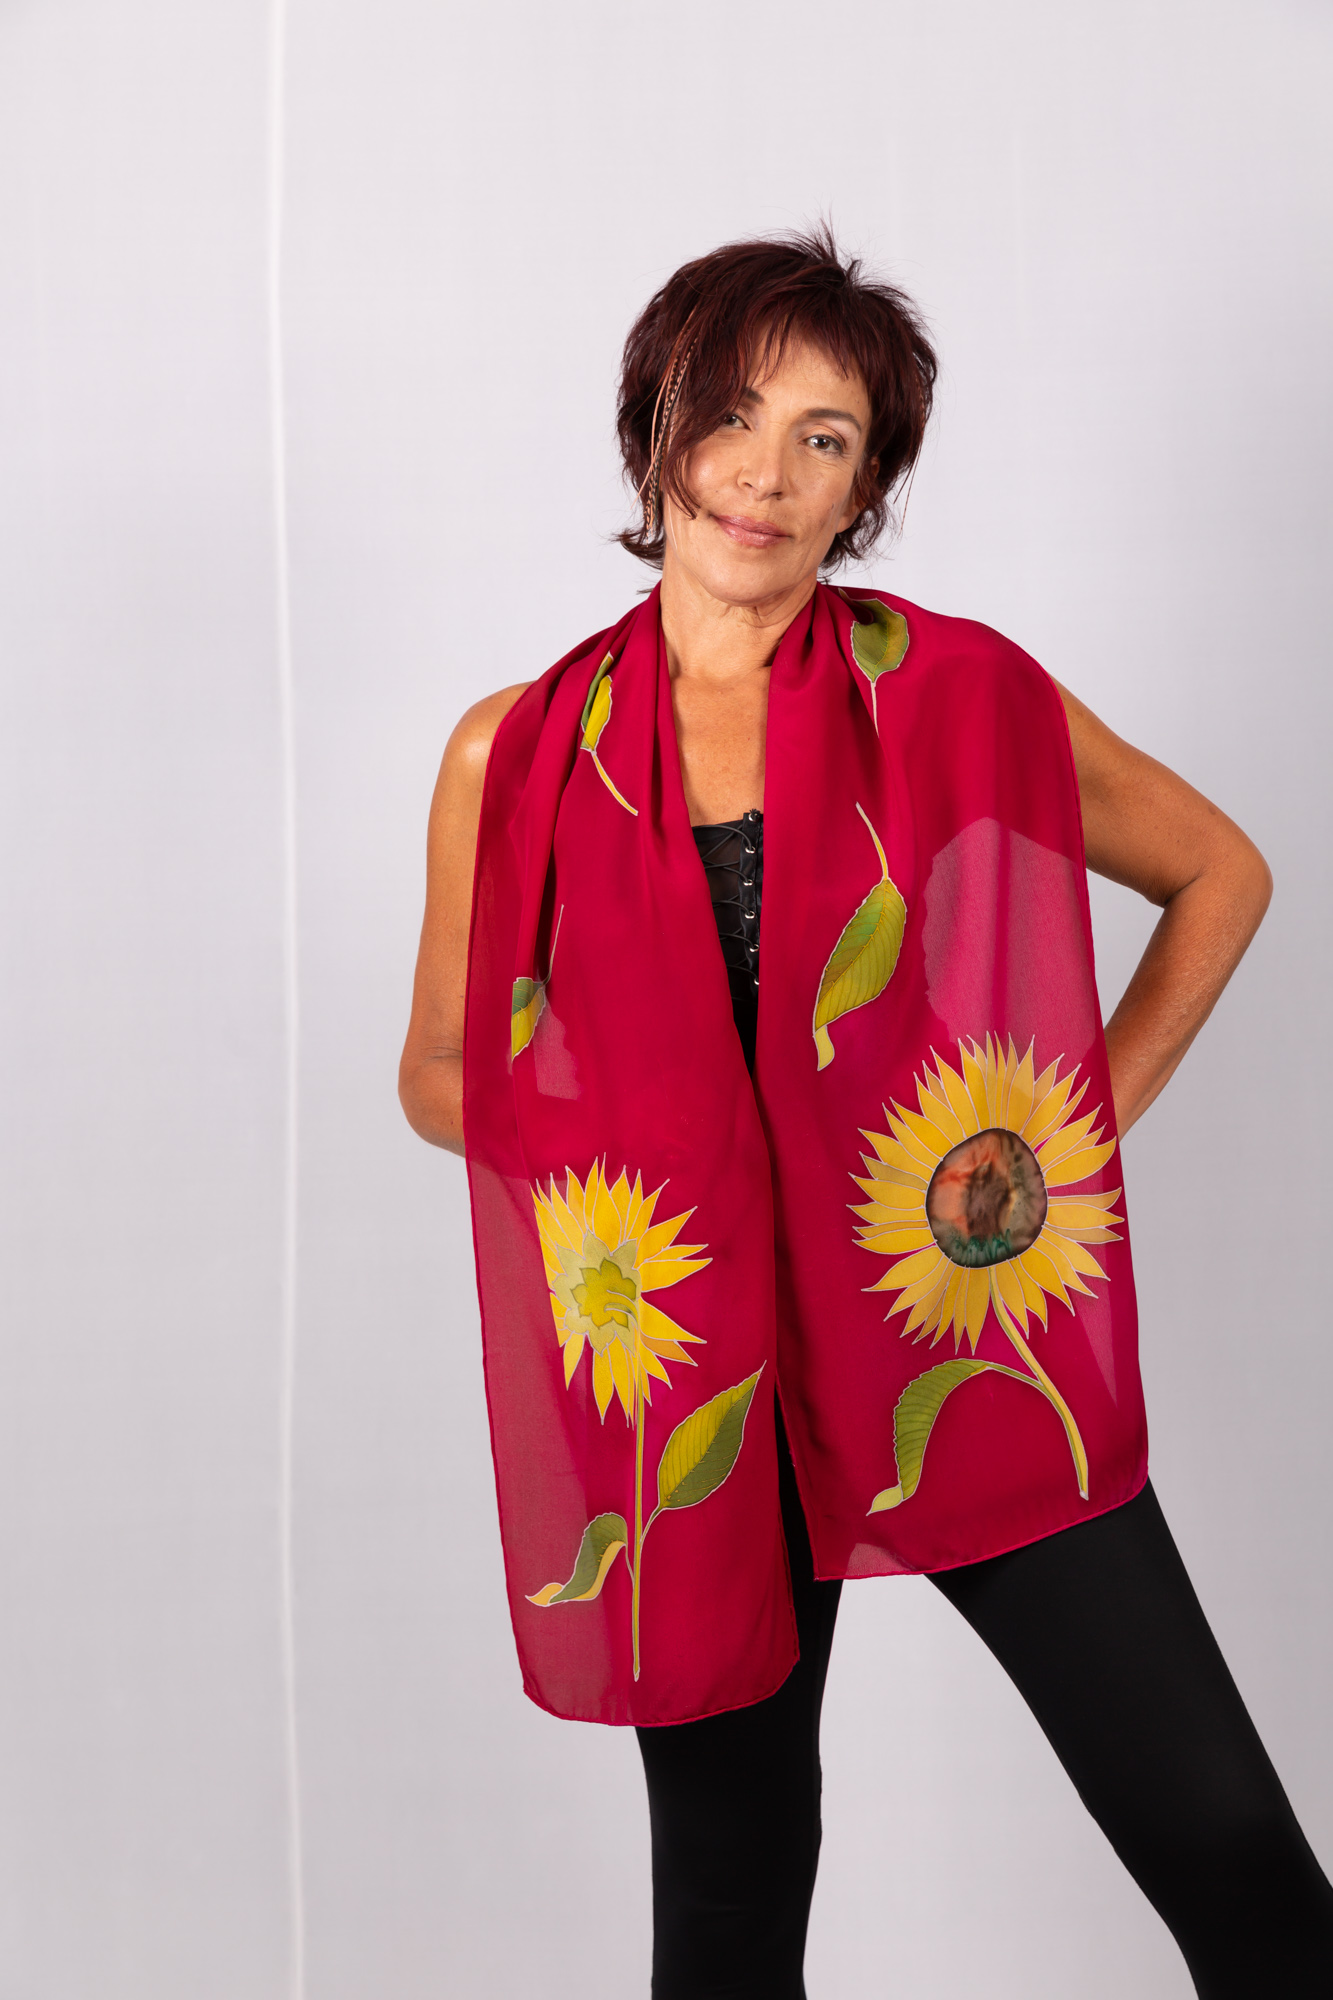 Silk crepe de chine scarf with sunflowers